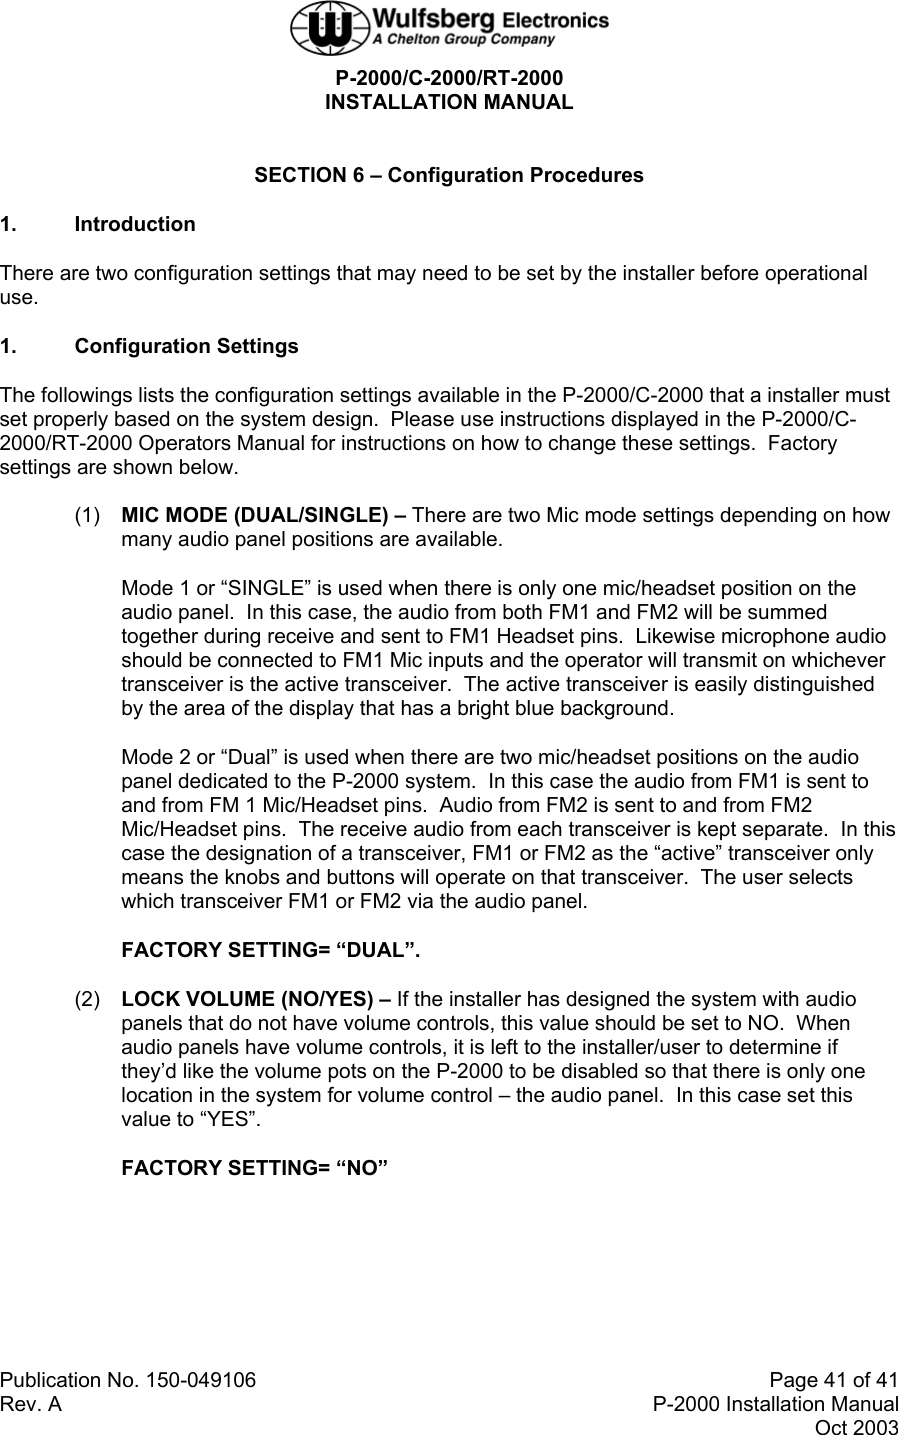  P-2000/C-2000/RT-2000 INSTALLATION MANUAL  Publication No. 150-049106  Page 41 of 41 Rev. A  P-2000 Installation Manual Oct 2003  SECTION 6 – Configuration Procedures 1. Introduction There are two configuration settings that may need to be set by the installer before operational use. 1. Configuration Settings The followings lists the configuration settings available in the P-2000/C-2000 that a installer must set properly based on the system design.  Please use instructions displayed in the P-2000/C-2000/RT-2000 Operators Manual for instructions on how to change these settings.  Factory settings are shown below. (1)  MIC MODE (DUAL/SINGLE) – There are two Mic mode settings depending on how many audio panel positions are available. Mode 1 or “SINGLE” is used when there is only one mic/headset position on the audio panel.  In this case, the audio from both FM1 and FM2 will be summed together during receive and sent to FM1 Headset pins.  Likewise microphone audio should be connected to FM1 Mic inputs and the operator will transmit on whichever transceiver is the active transceiver.  The active transceiver is easily distinguished by the area of the display that has a bright blue background. Mode 2 or “Dual” is used when there are two mic/headset positions on the audio panel dedicated to the P-2000 system.  In this case the audio from FM1 is sent to and from FM 1 Mic/Headset pins.  Audio from FM2 is sent to and from FM2 Mic/Headset pins.  The receive audio from each transceiver is kept separate.  In this case the designation of a transceiver, FM1 or FM2 as the “active” transceiver only means the knobs and buttons will operate on that transceiver.  The user selects which transceiver FM1 or FM2 via the audio panel. FACTORY SETTING= “DUAL”. (2)  LOCK VOLUME (NO/YES) – If the installer has designed the system with audio panels that do not have volume controls, this value should be set to NO.  When audio panels have volume controls, it is left to the installer/user to determine if they’d like the volume pots on the P-2000 to be disabled so that there is only one location in the system for volume control – the audio panel.  In this case set this value to “YES”. FACTORY SETTING= “NO”  